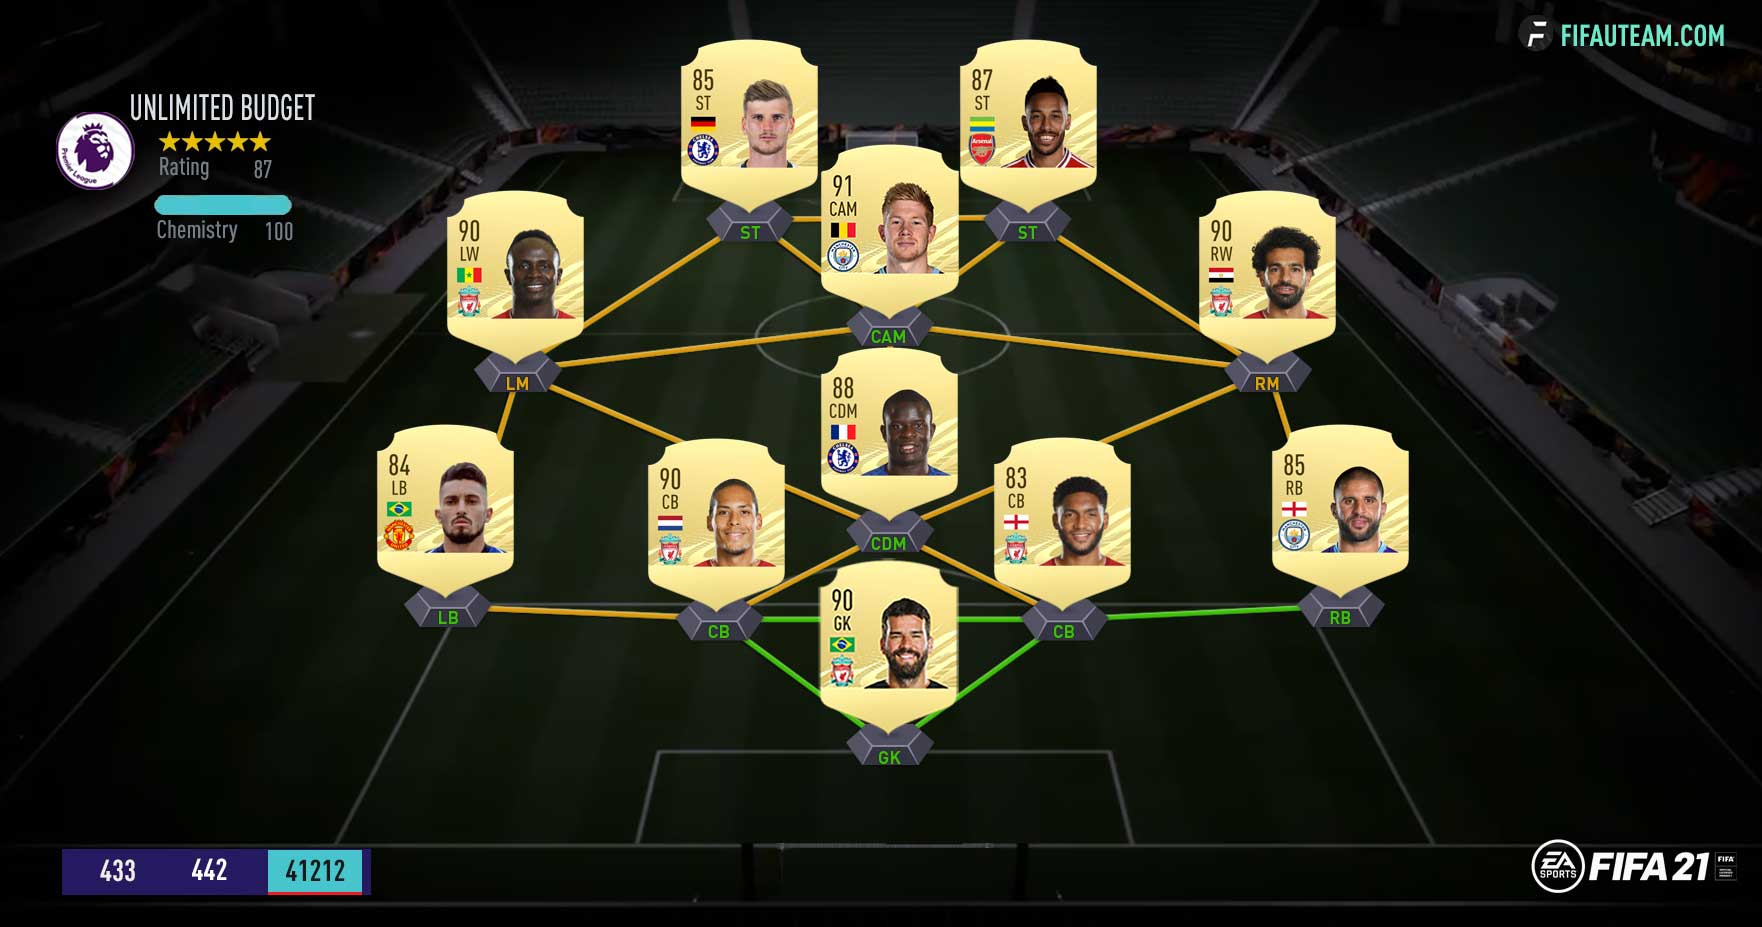 The Best FIFA 21 League to Play on Ultimate Team